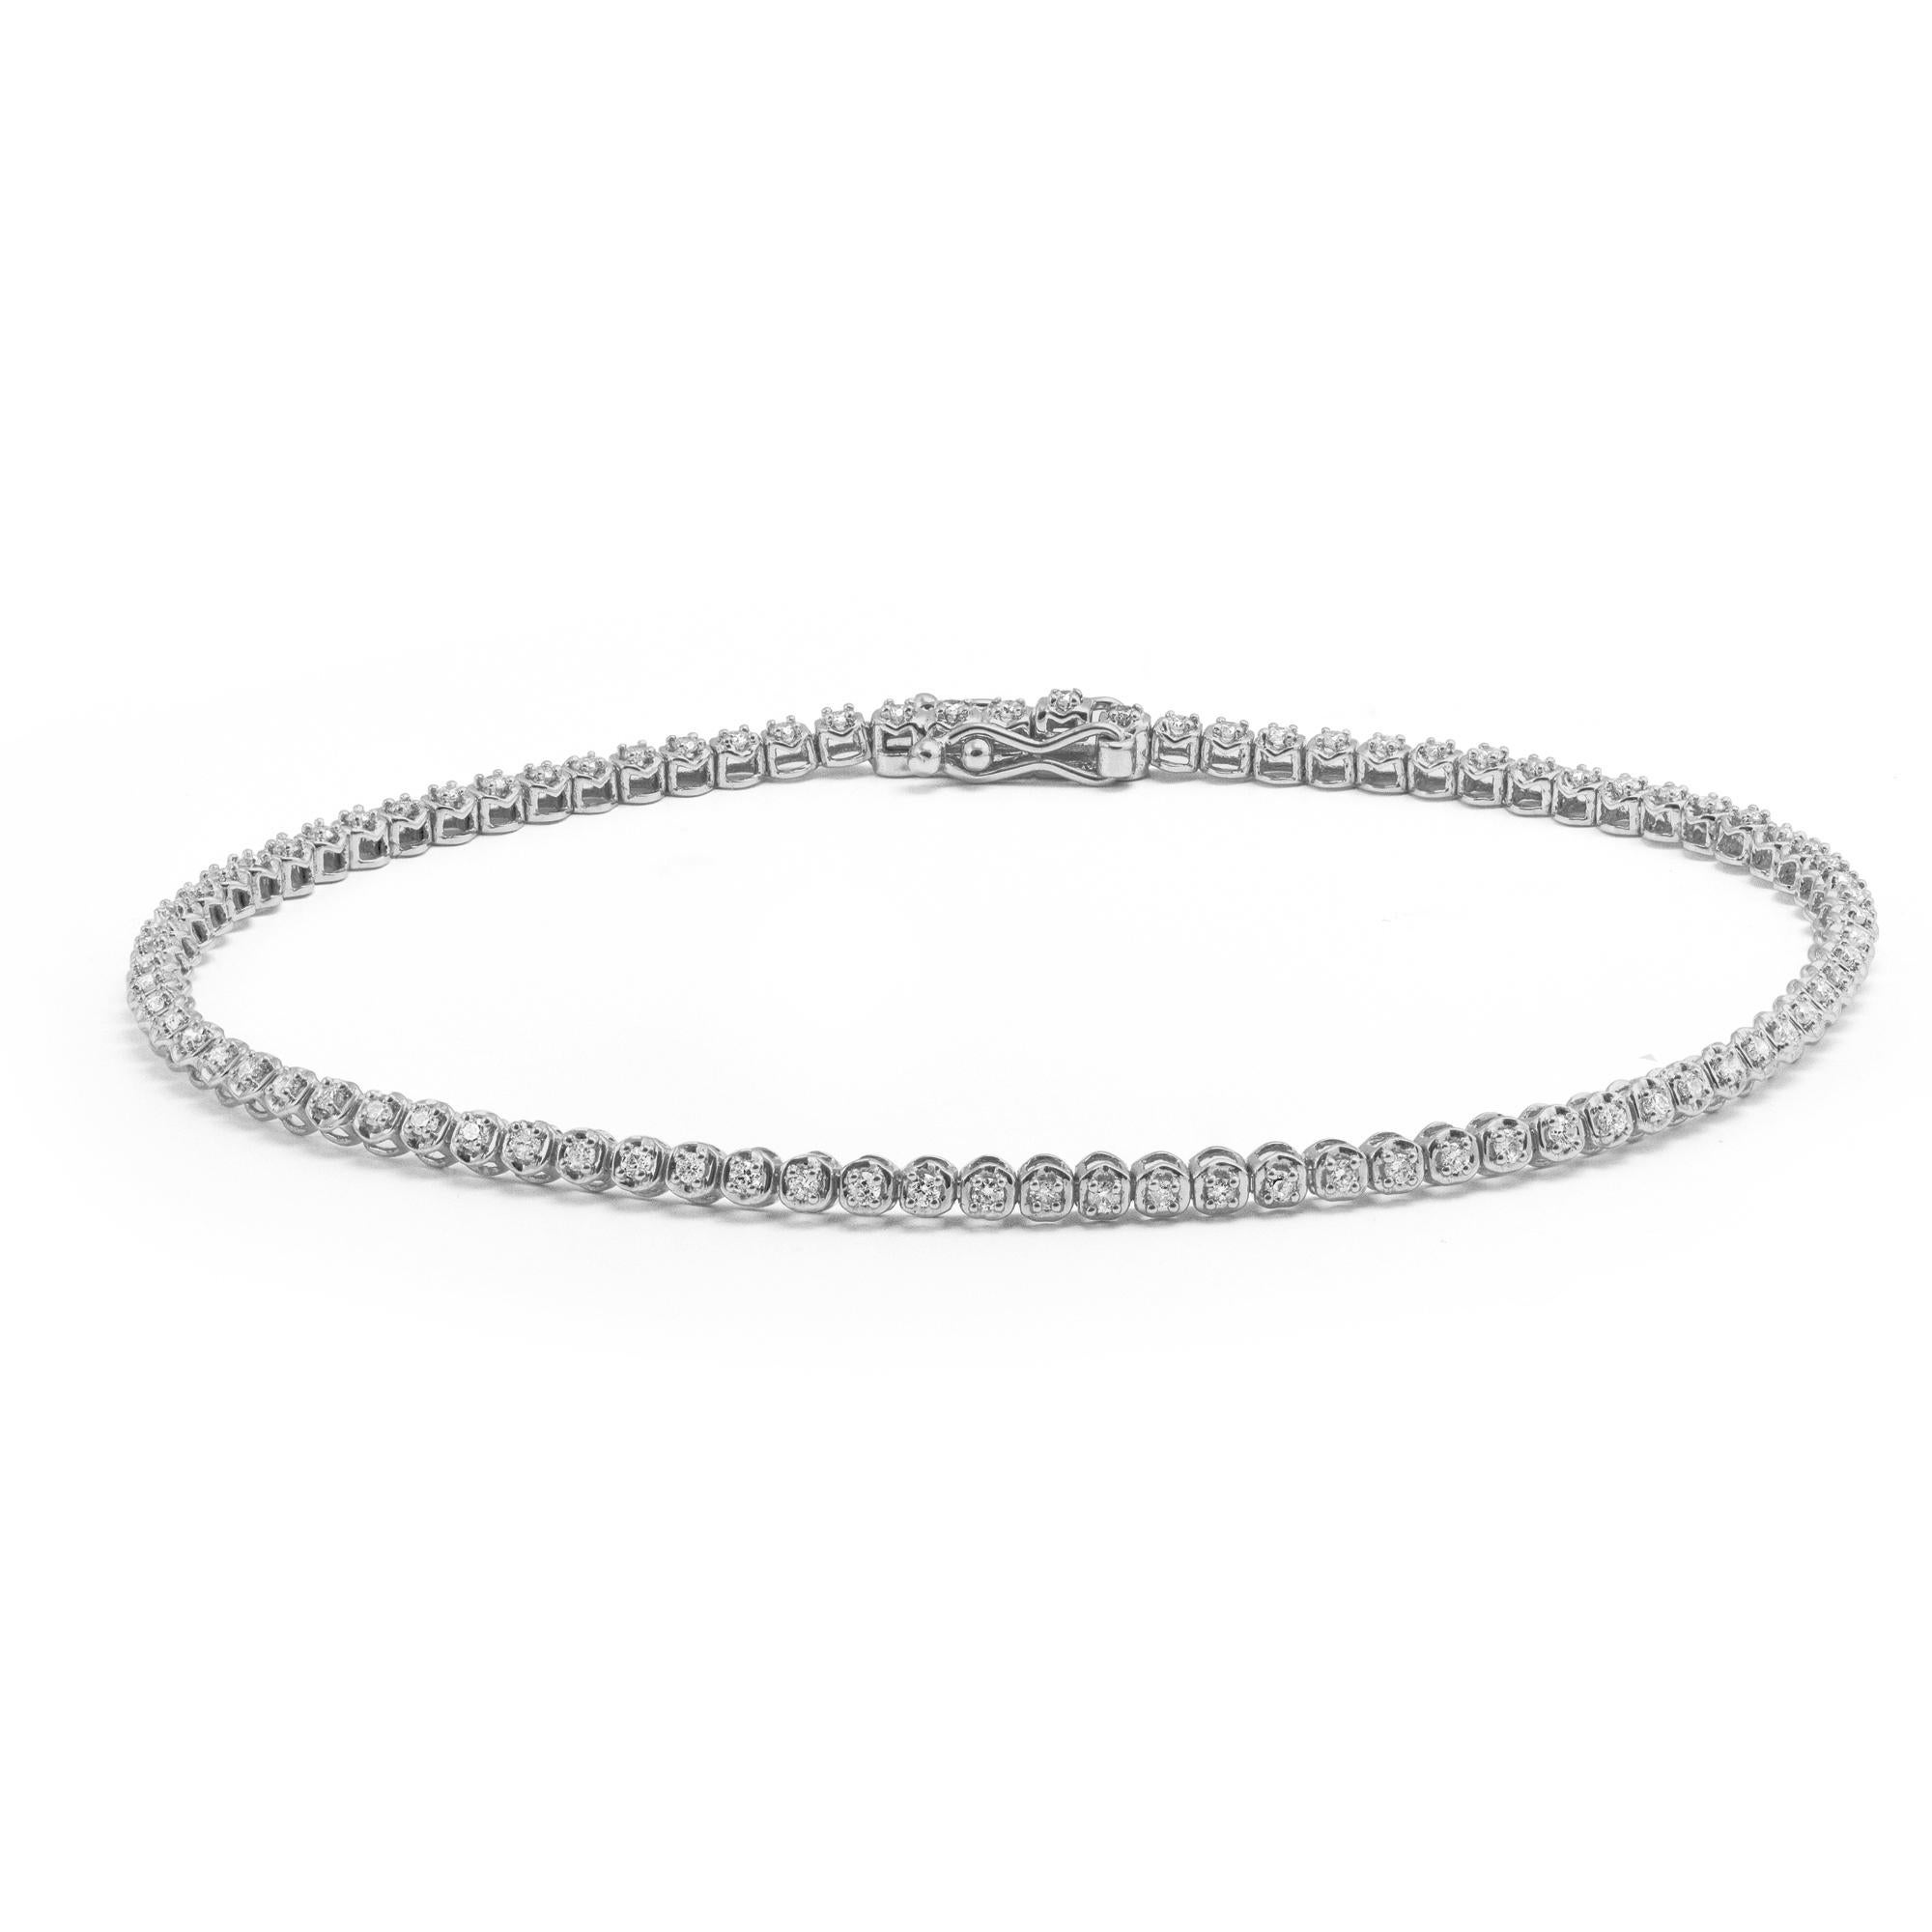 This Round Brilliant Diamond Tennis Bracelet is made in 14 karat White Gold, set with natural, colourless diamonds. With a total diamond carat weight (approximate) of 0.50 carat, The Diamonds are G-H colour, VS-Si clarity. Also comes in 14 karat